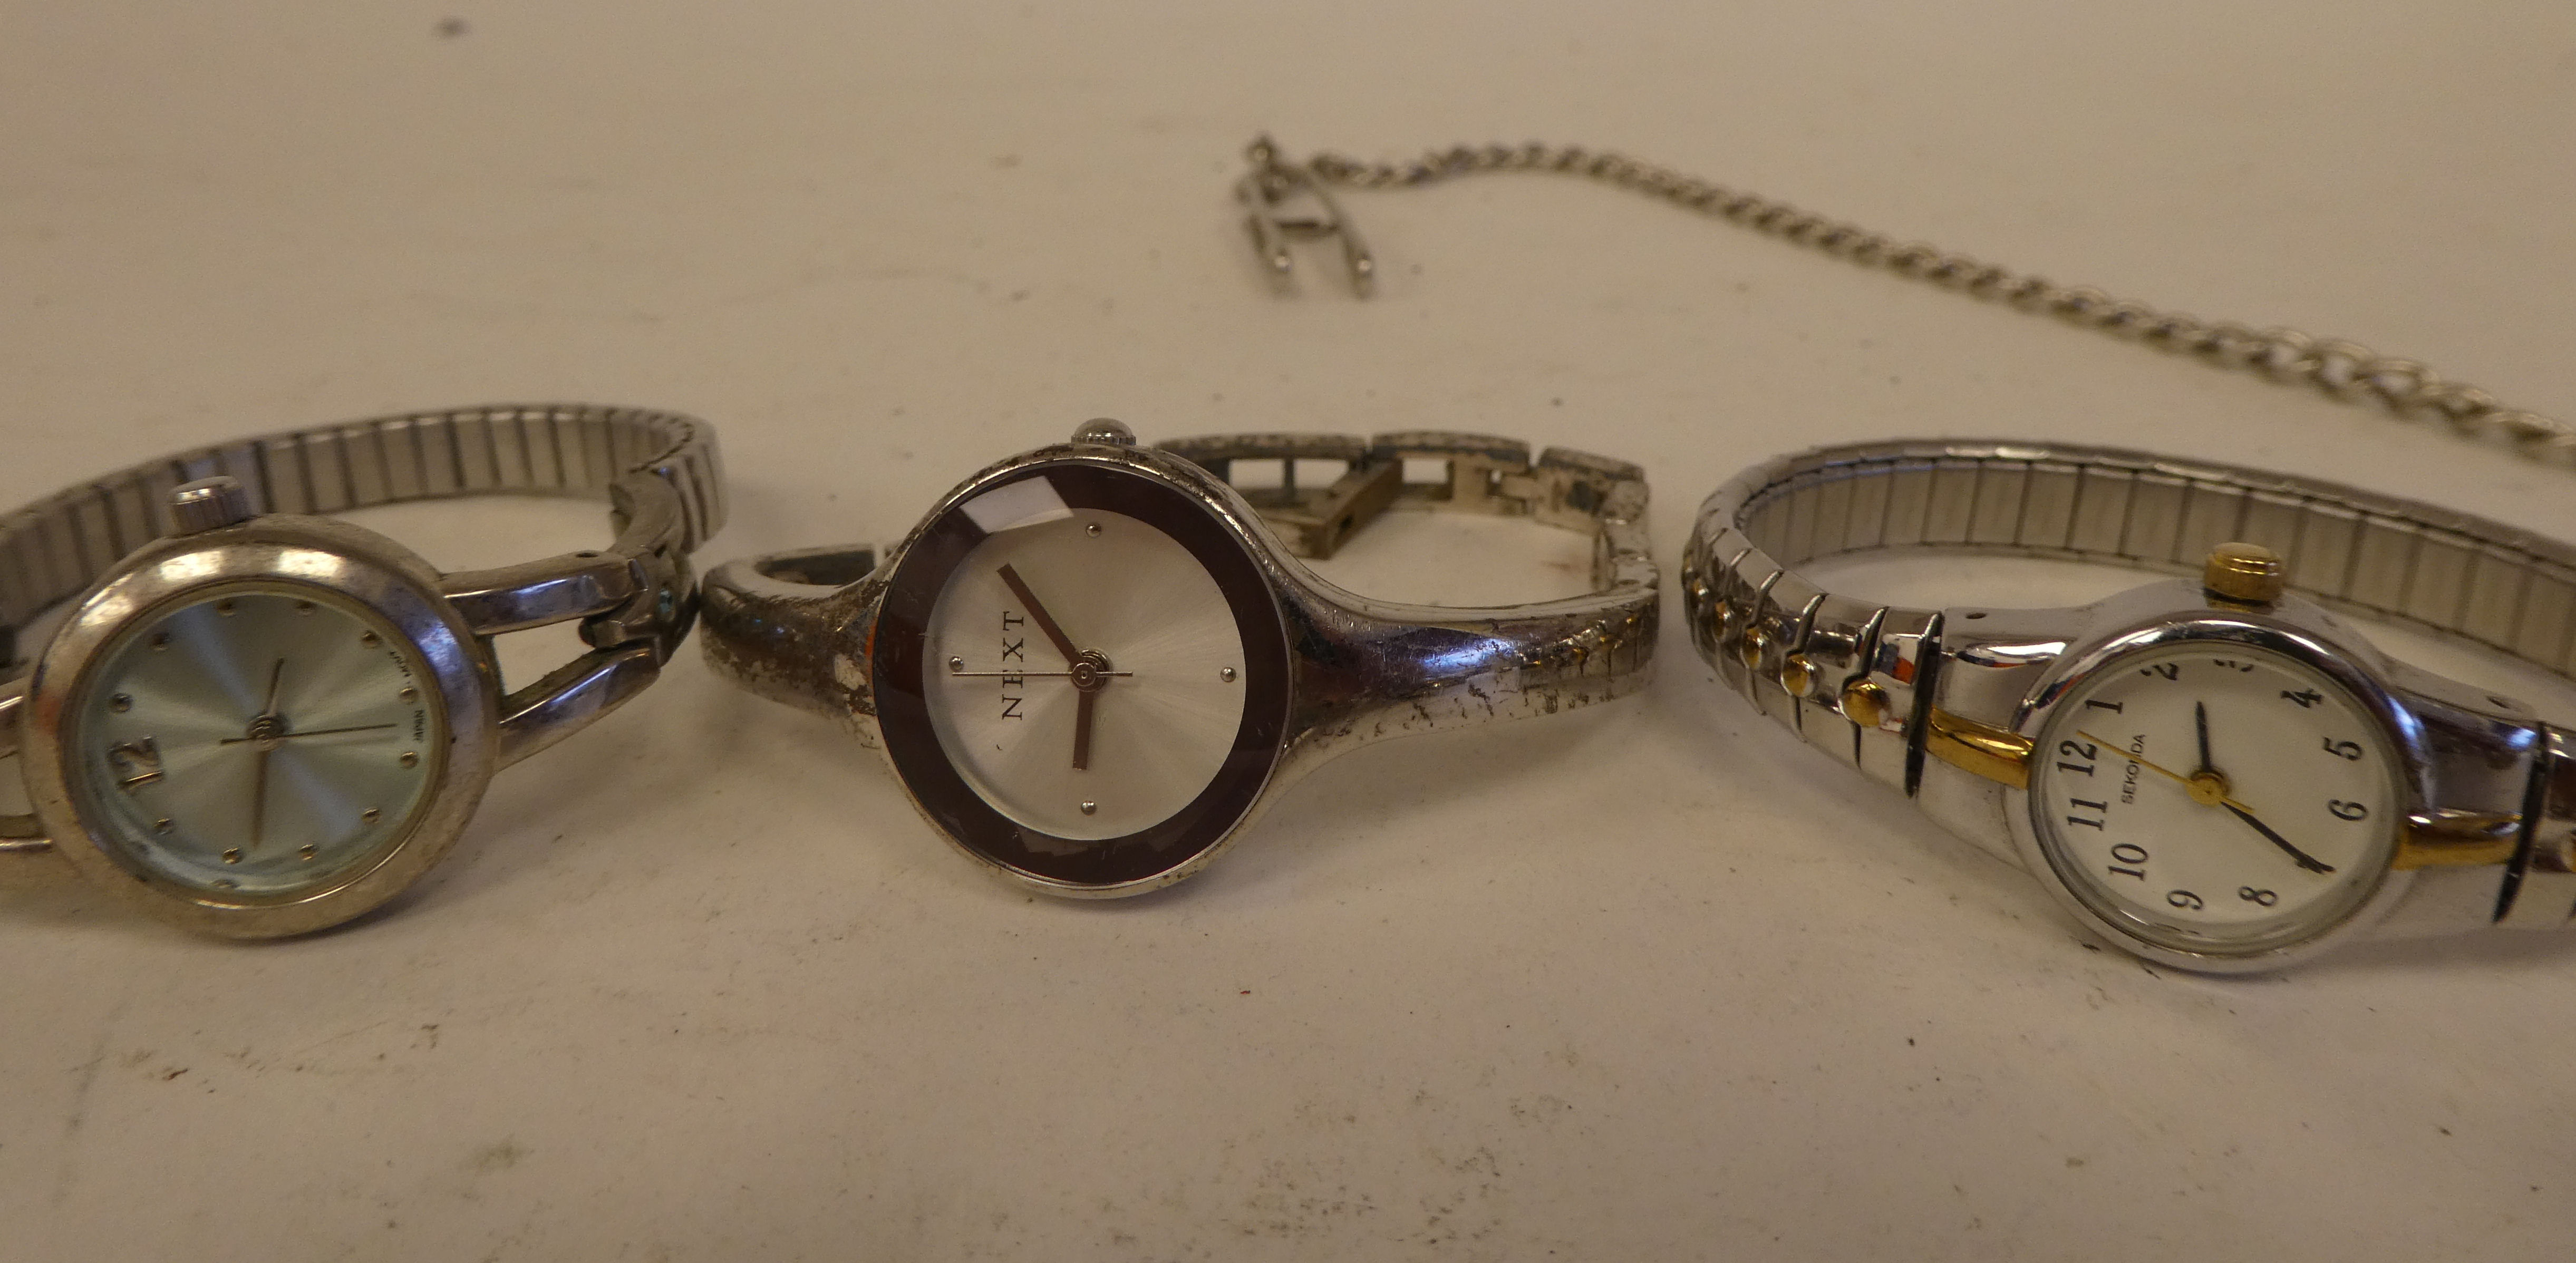 Variously cased and strapped wristwatches - Image 17 of 47